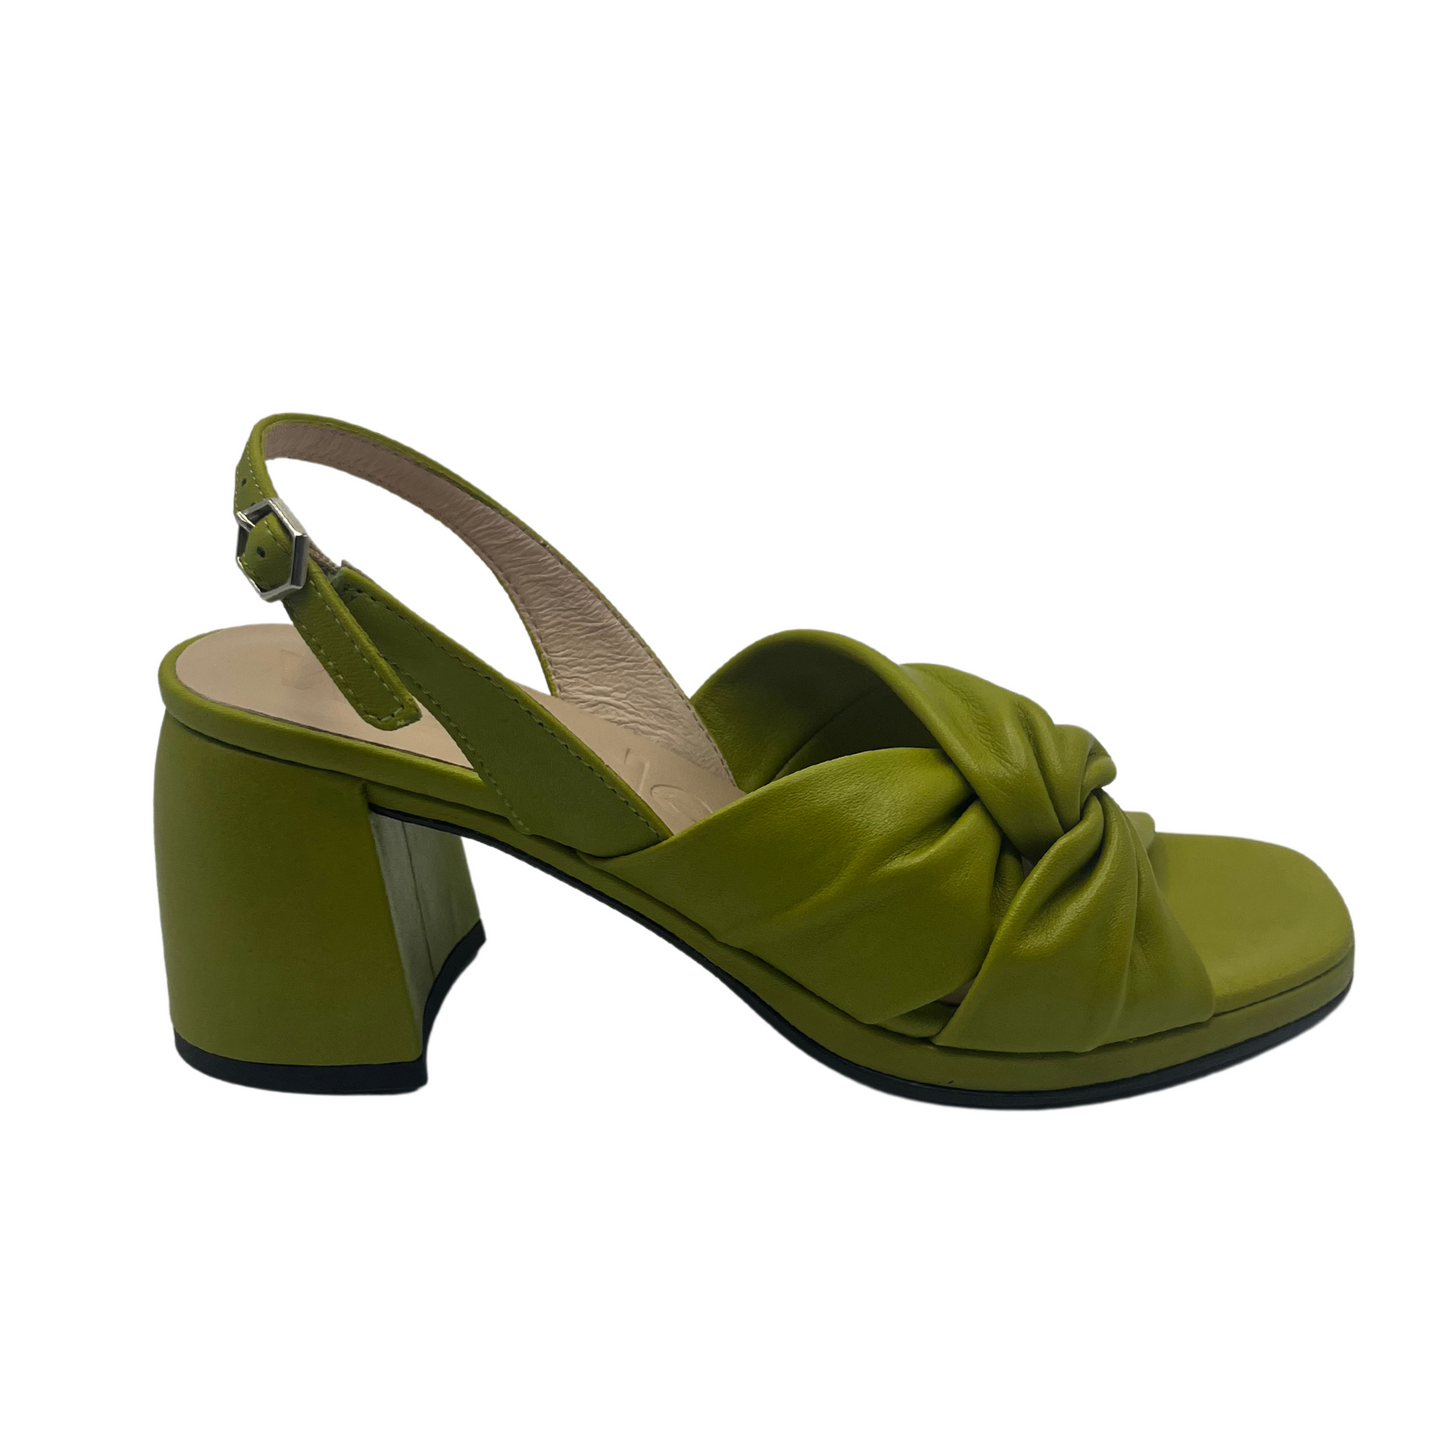 Right facing view of Apple green sandal with chunky block heel and buckle strap